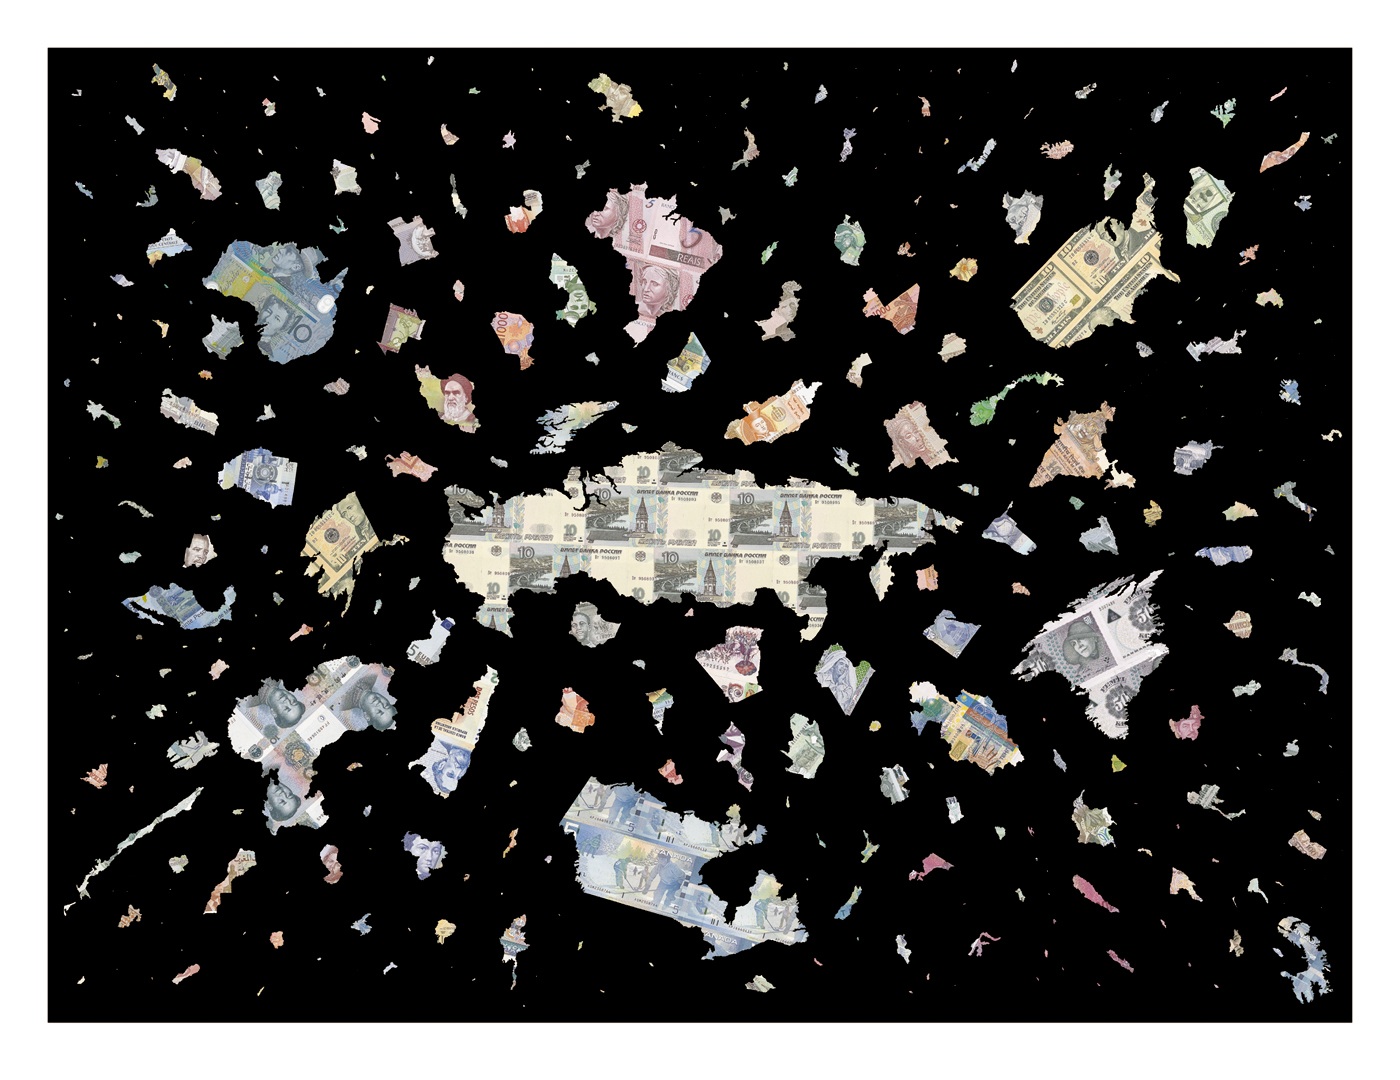 A Bigger Bang - Black - a limited edition money map print by Justine Smith, London